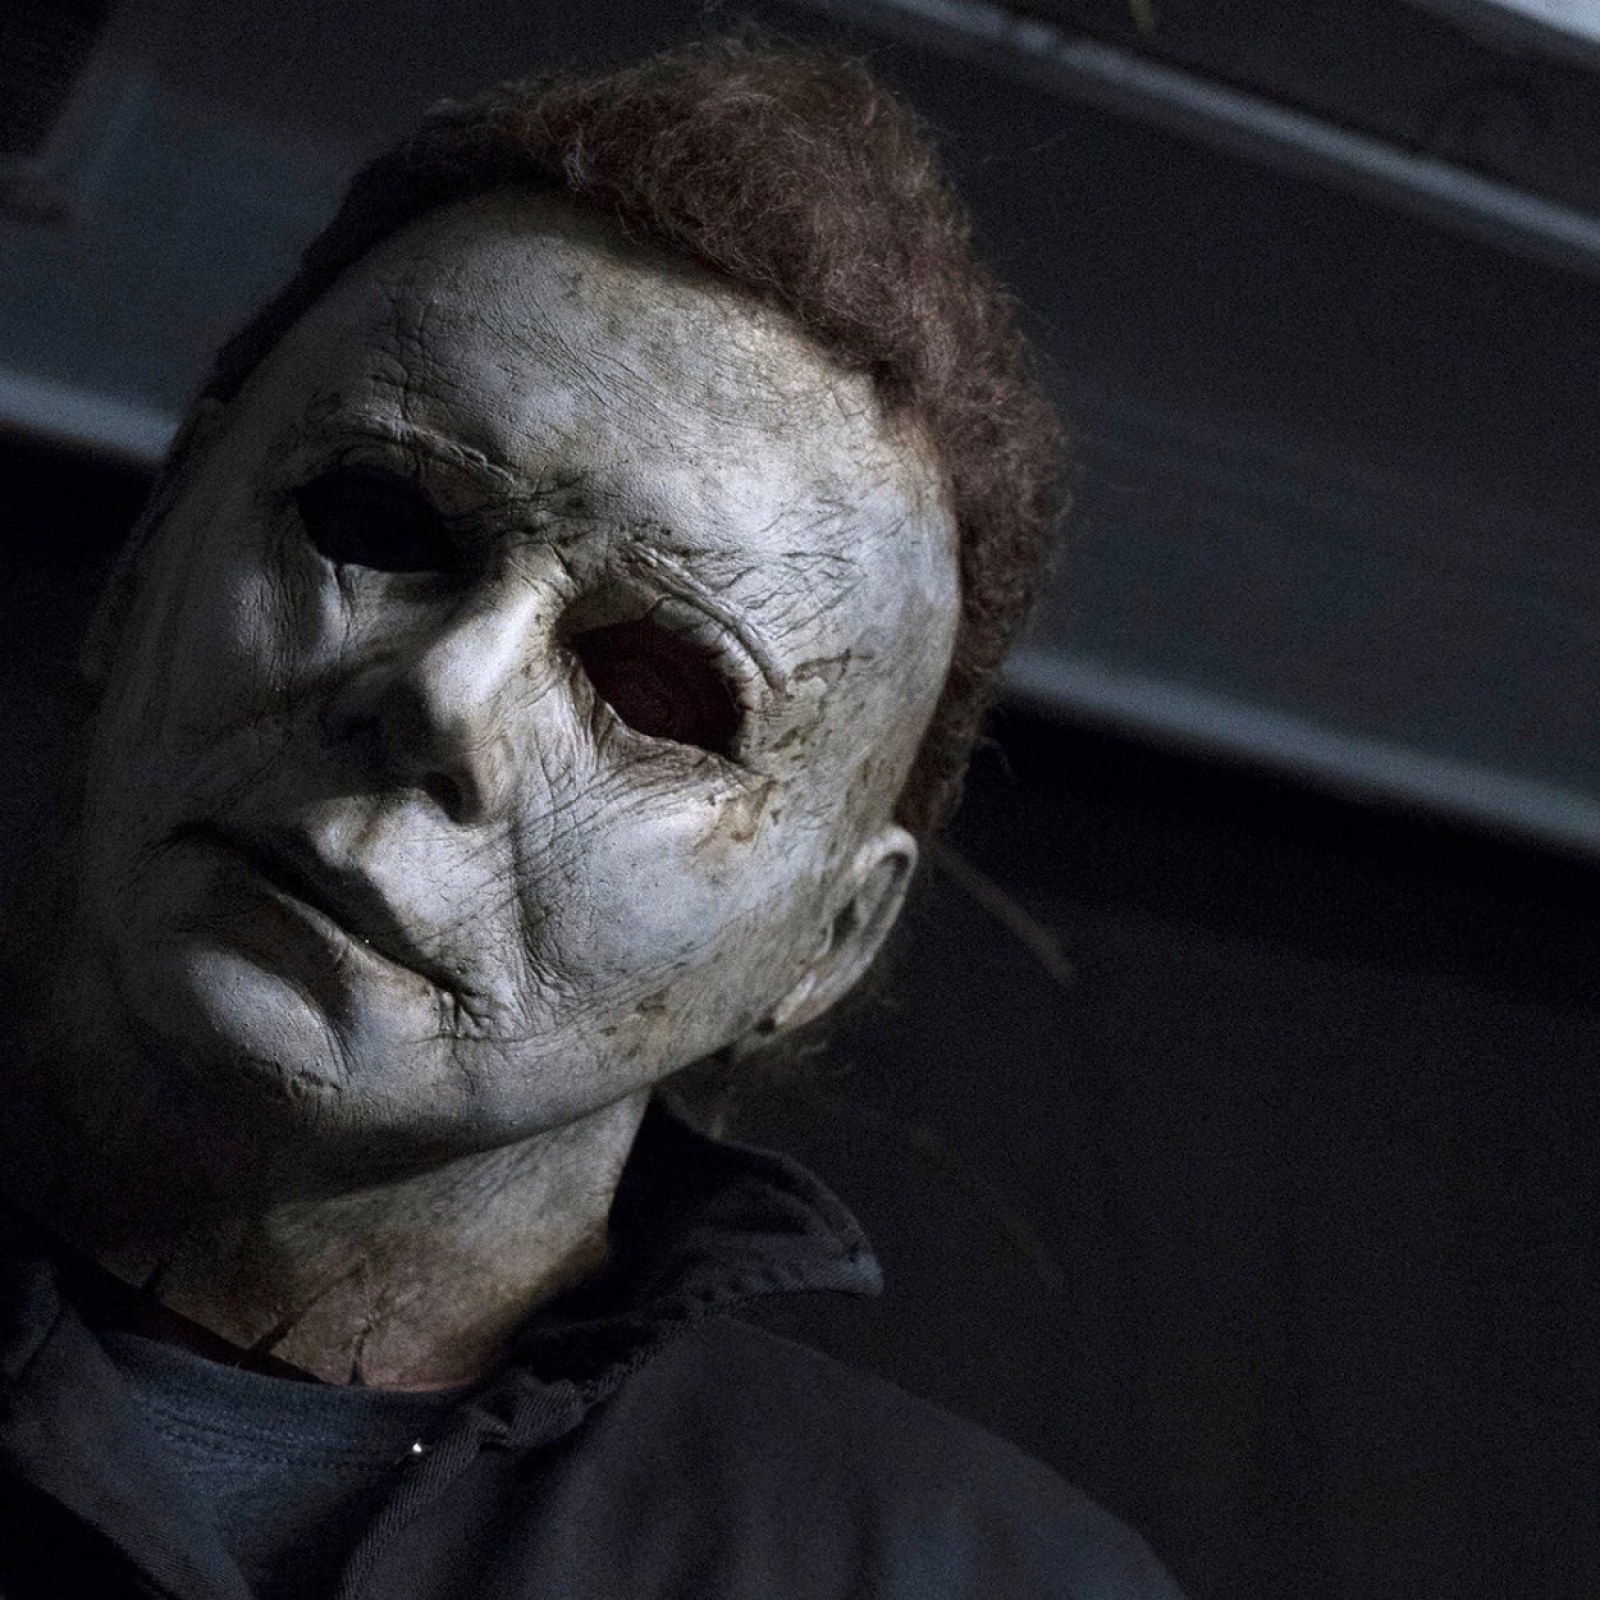 halloween 2020 michaels face Michael Myers Face Without The Mask Halloween 2018 Killer Revealed halloween 2020 michaels face